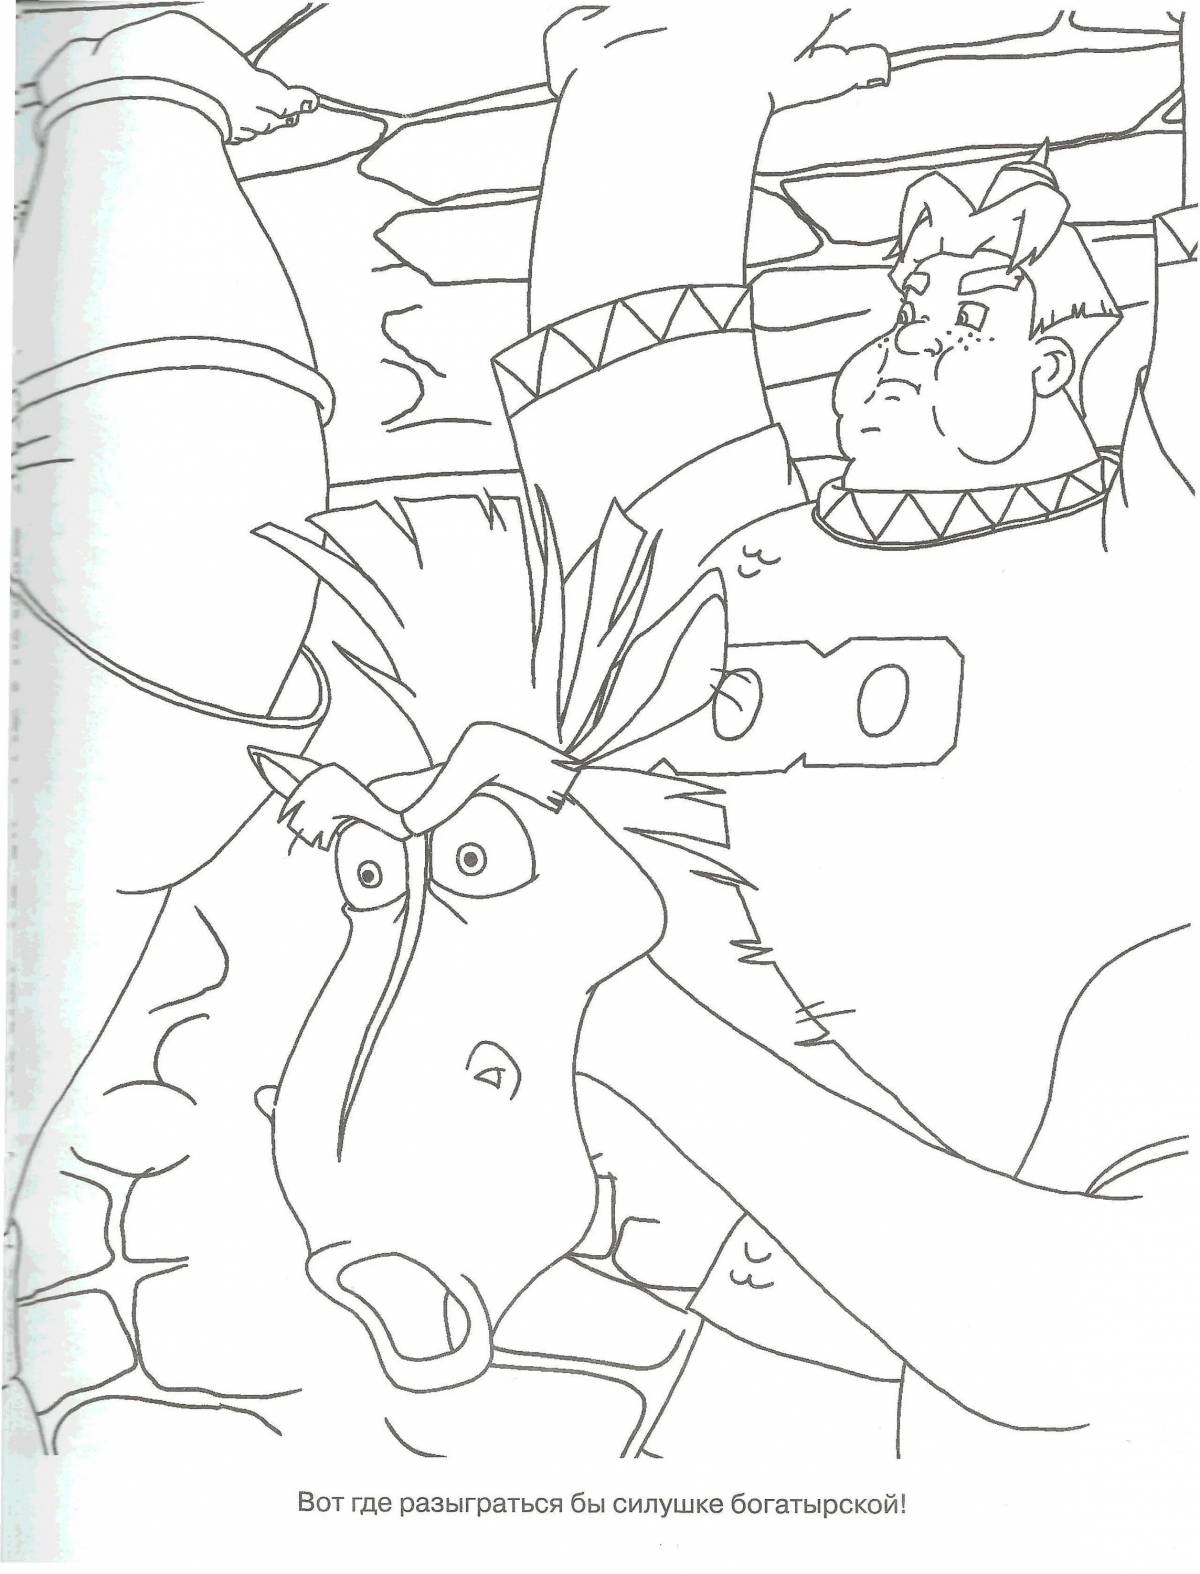 Incredible coloring page 3 heroes game